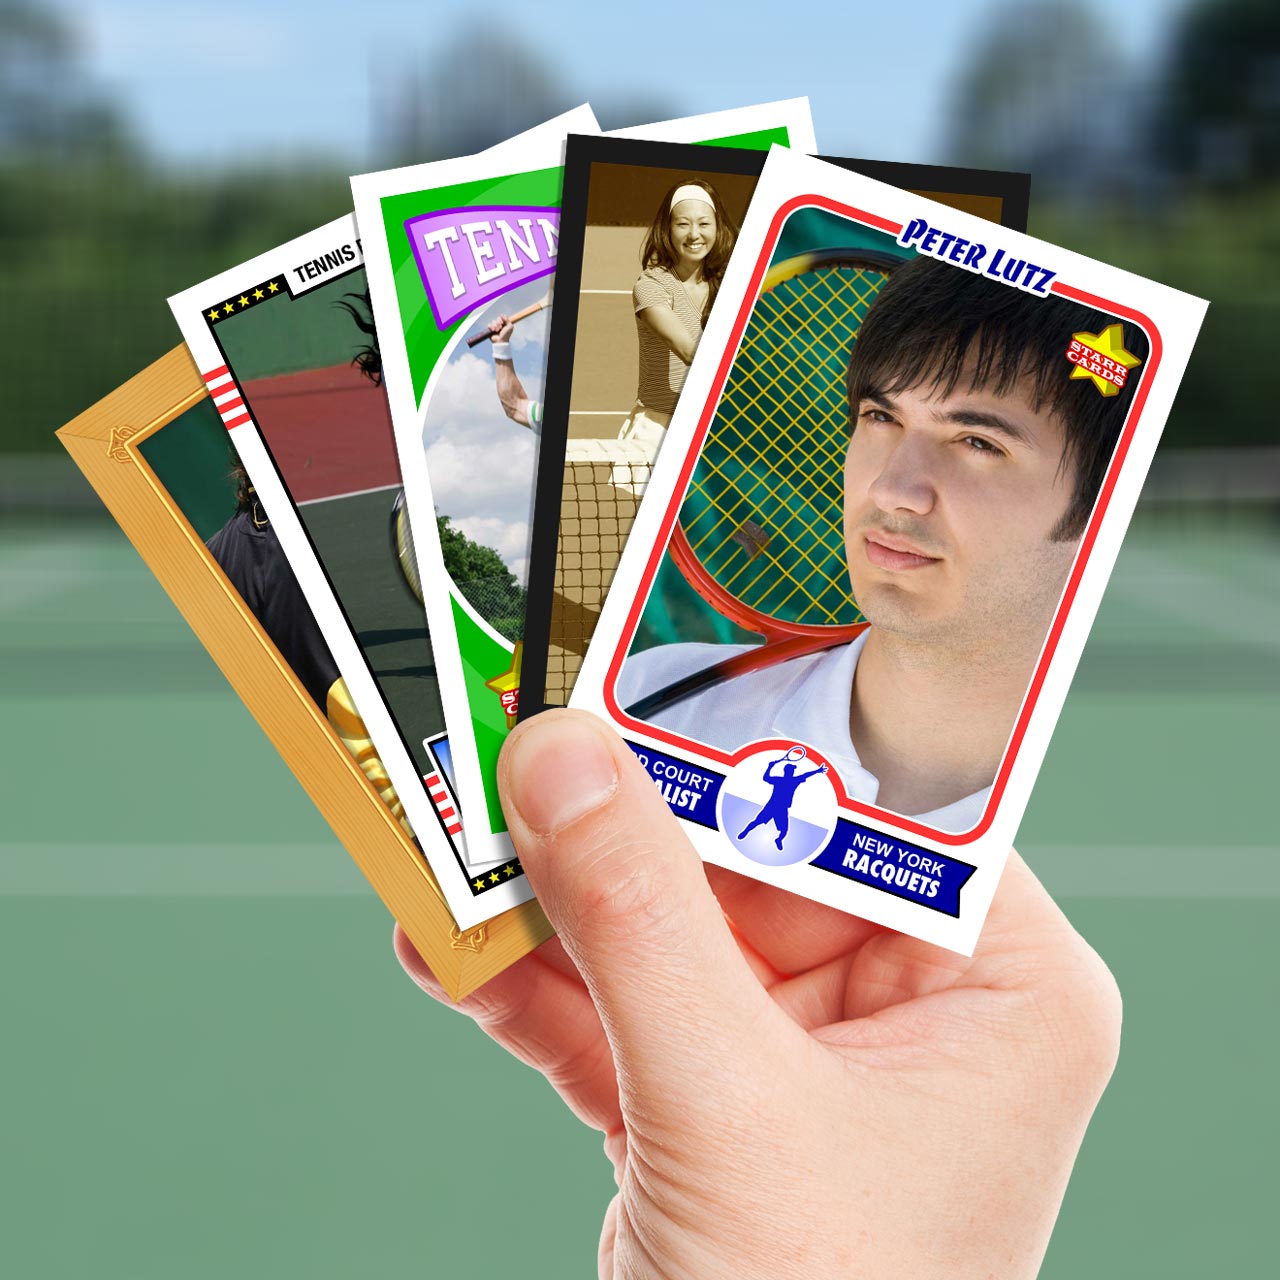 Make Your Own Tennis Card